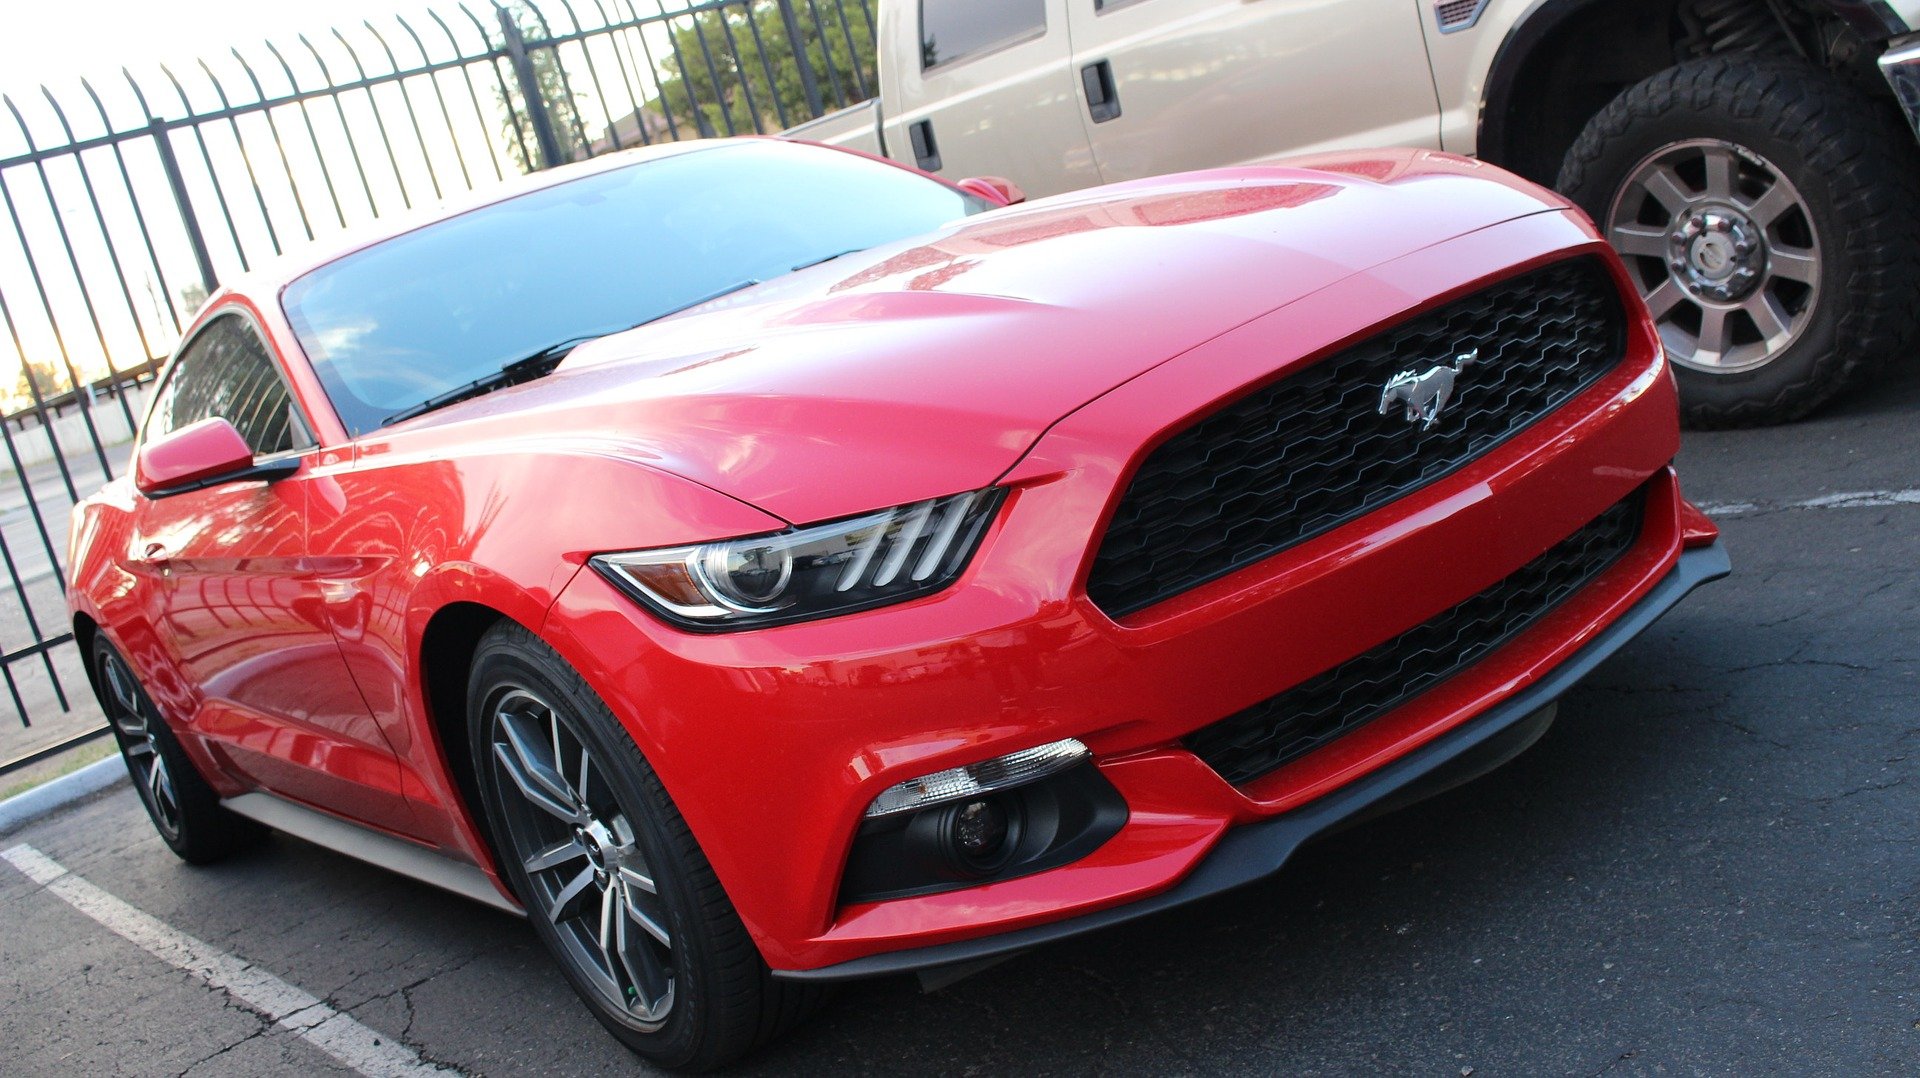 Red Mustang in Gainesville